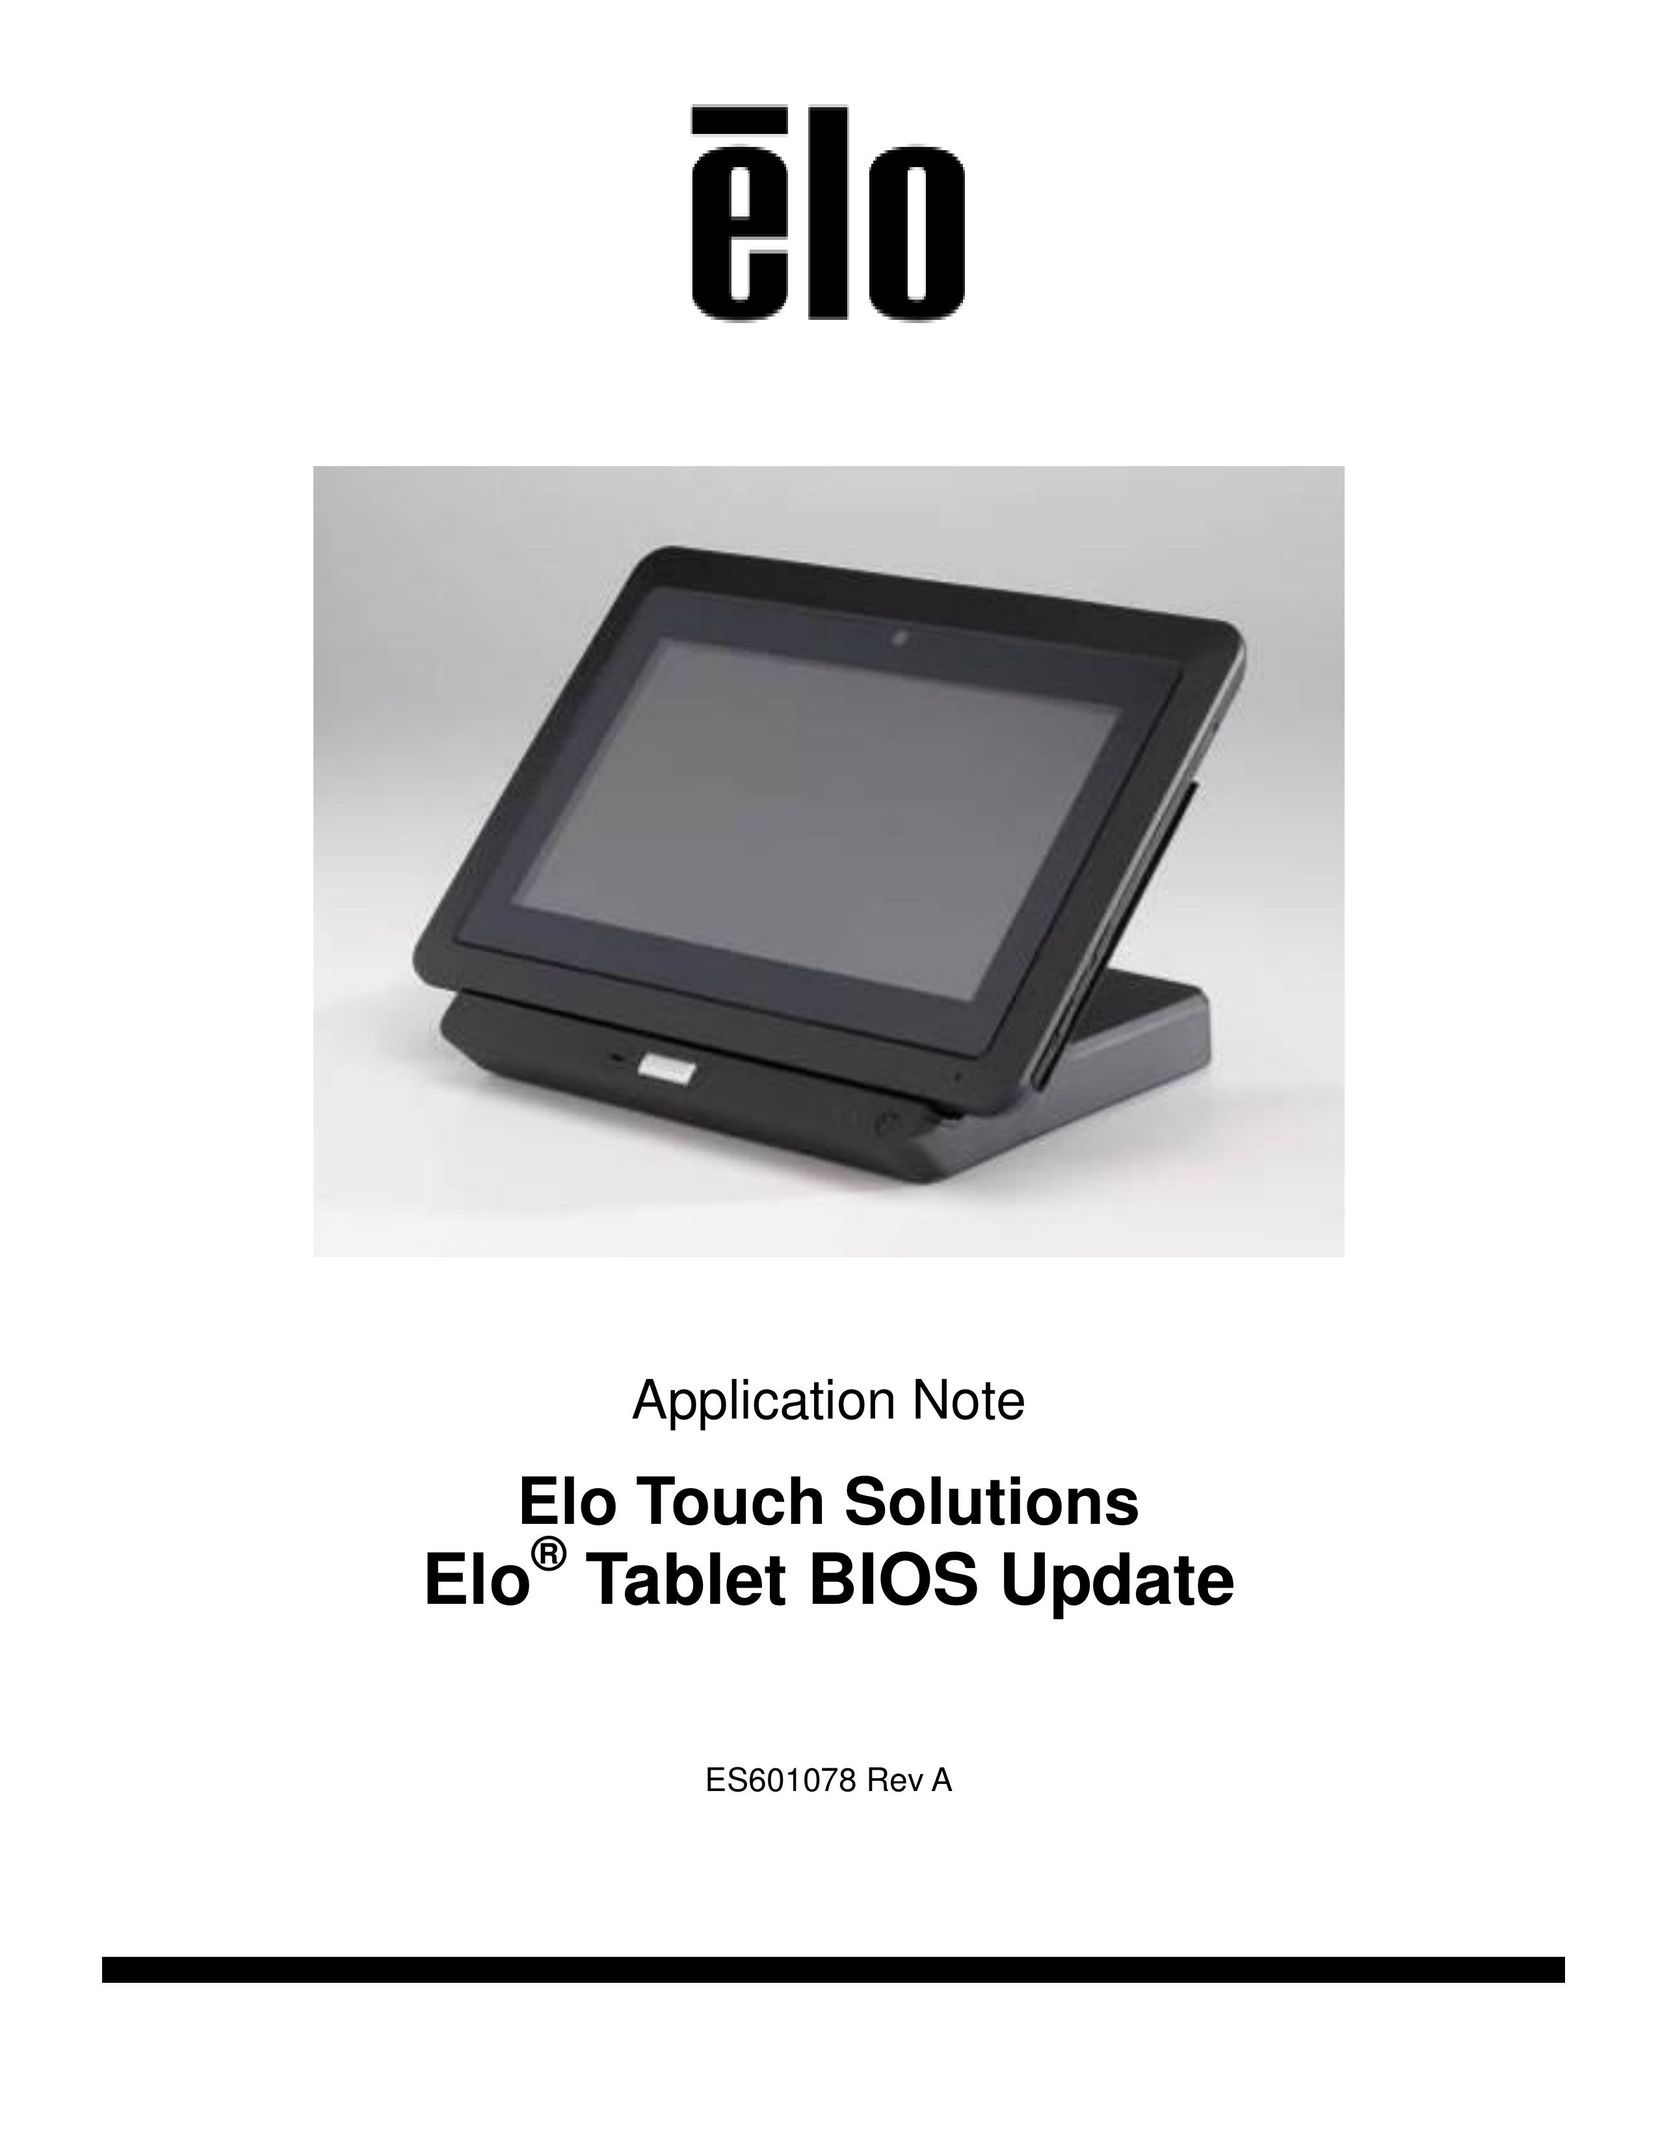 Elo TouchSystems ES601078 Rev A Graphics Tablet User Manual